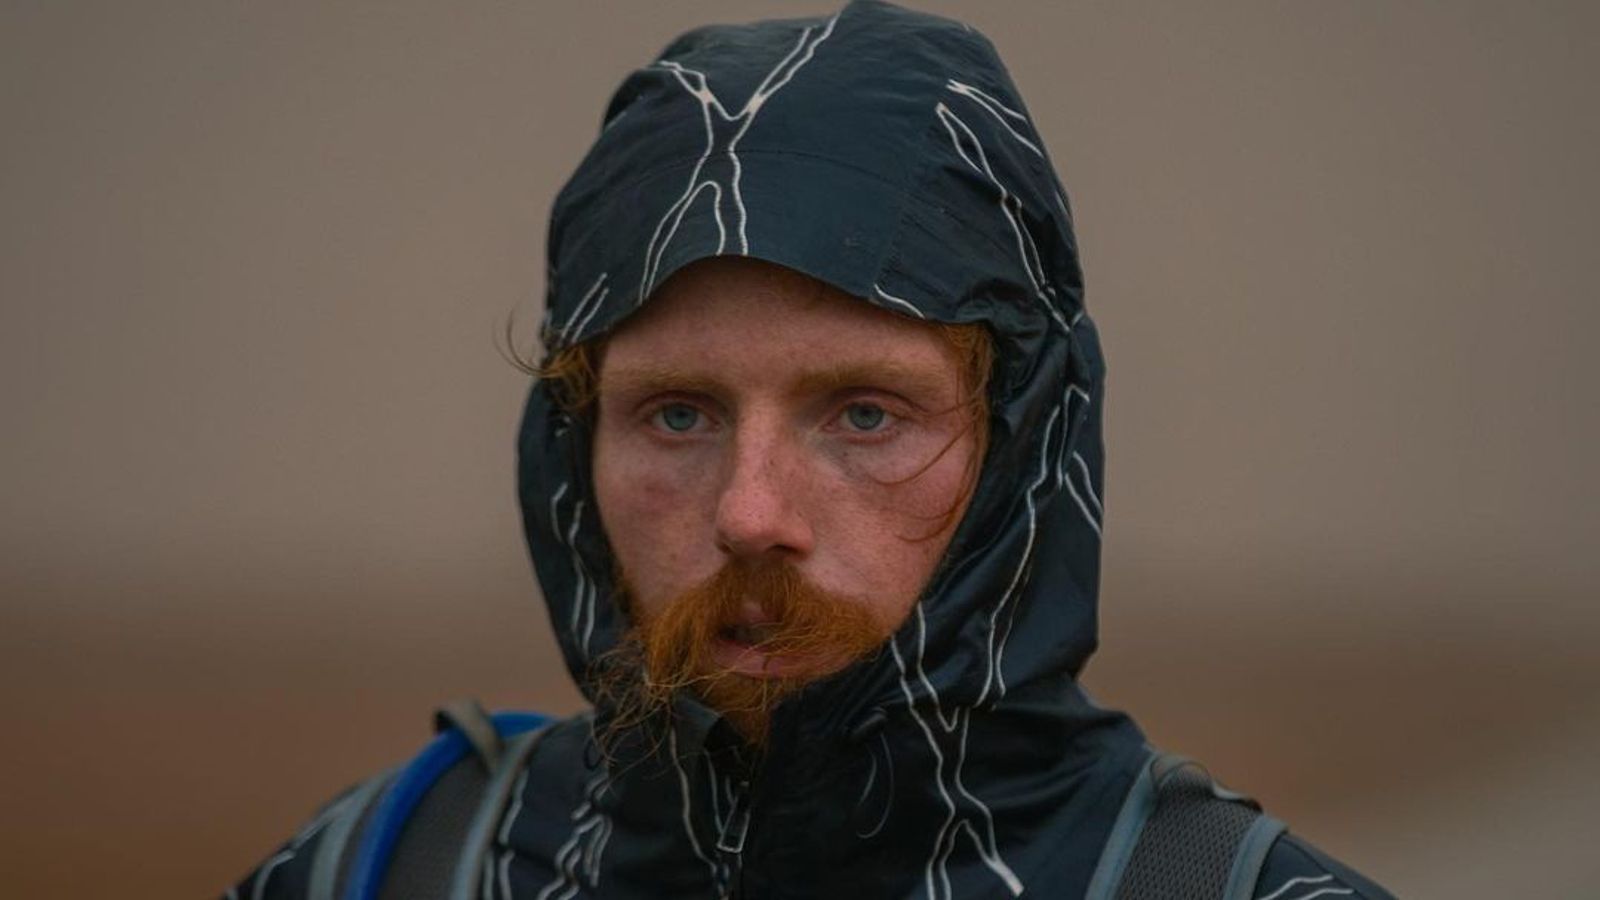 Briton Russ Cook set to finish running length of Africa after robbery ordeal and going missing in jungle